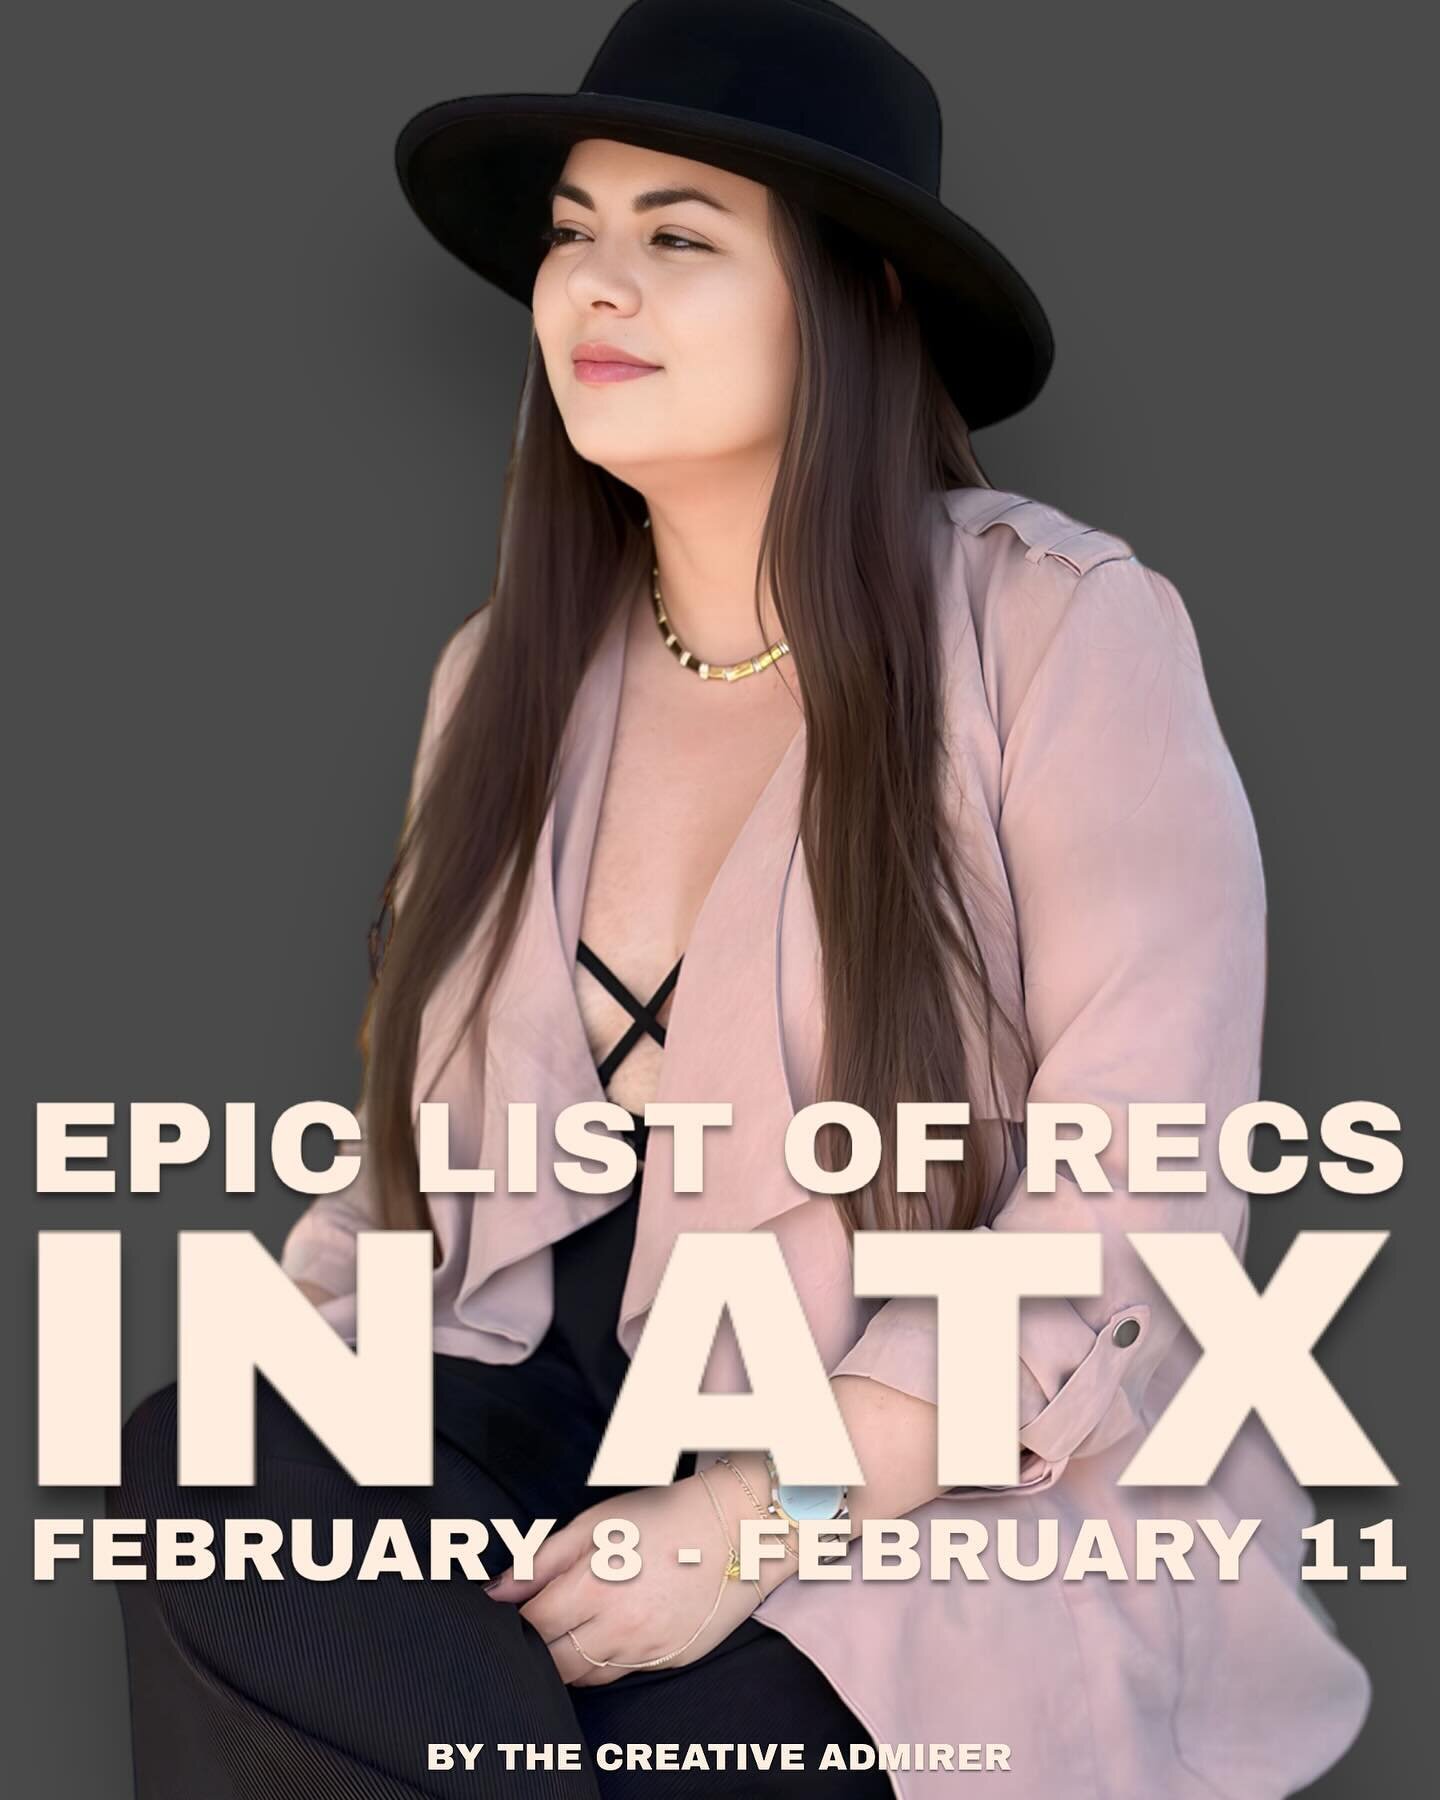 EPIC LIST OF ATX RECS 🙌 Thursday, February 8 - Sunday, February 11

✨This schedule feels like a trifecta holiday thrown into one weekend y&rsquo;all!
&nbsp;
🌹We have Galentine&rsquo;s / Anti-Valentine&rsquo;s stacked on stacked themes all. weekend.